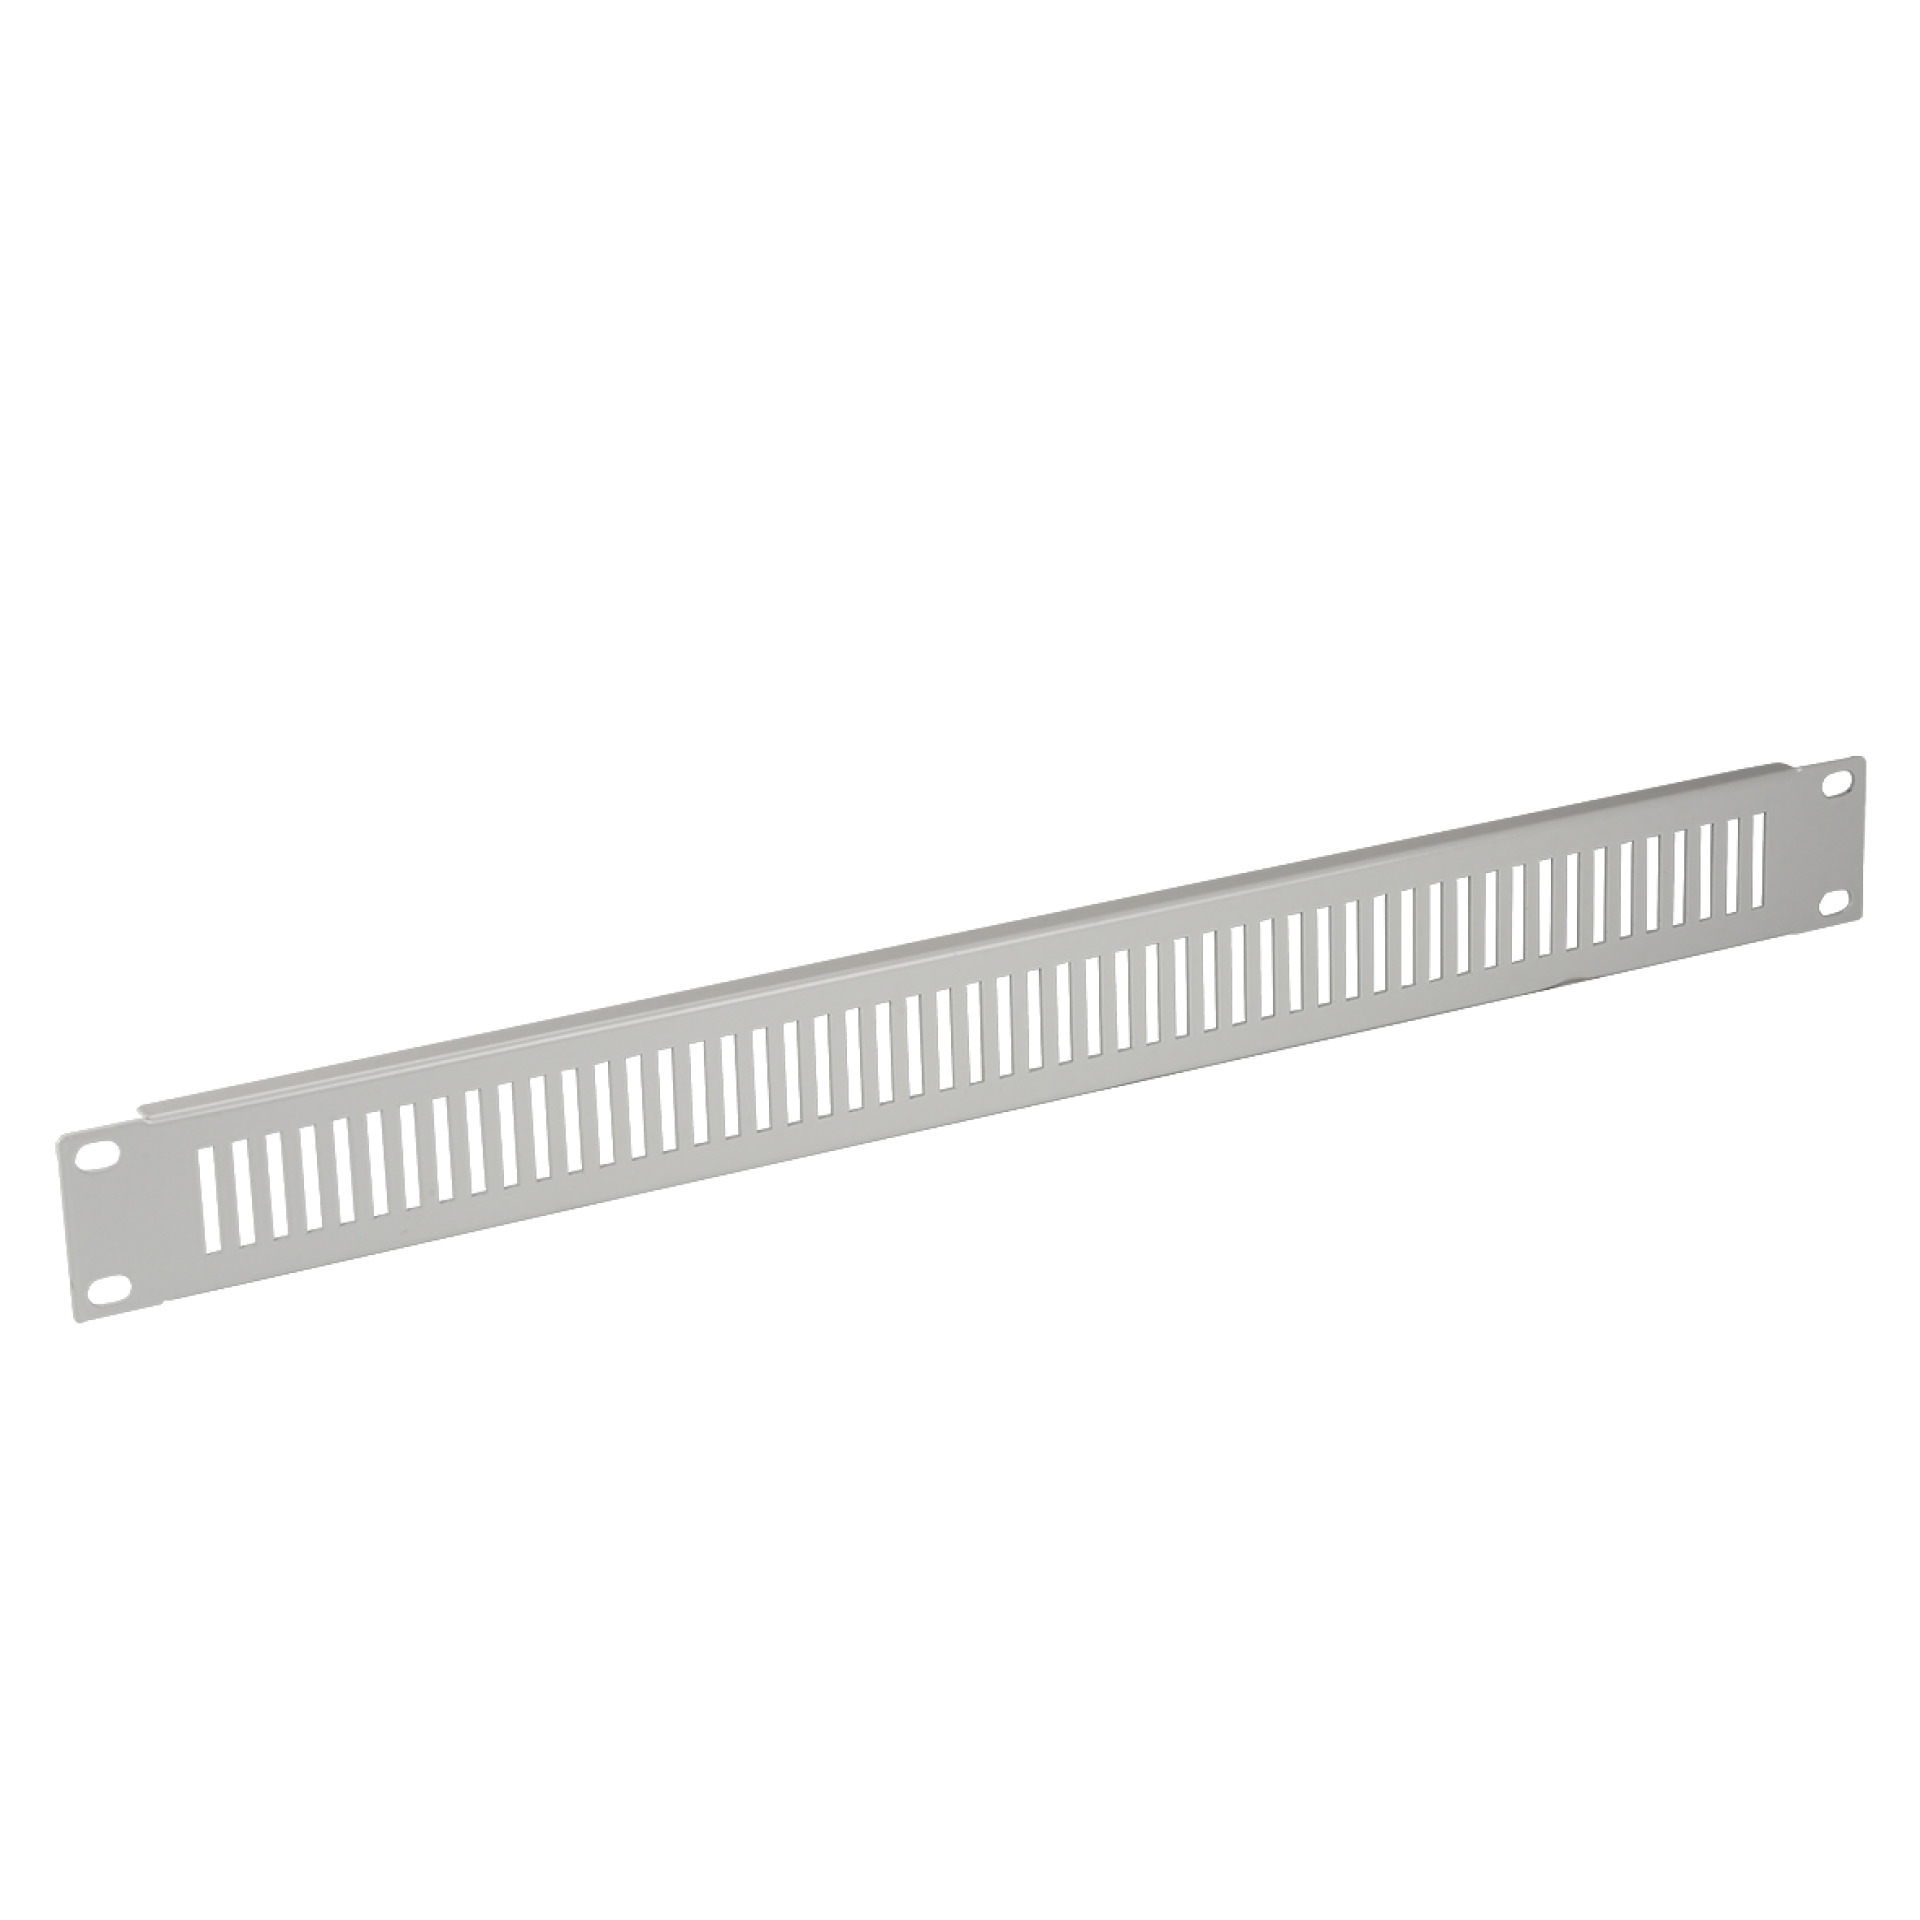 19" 2U Dummy Plate, Perforated, RAL7035